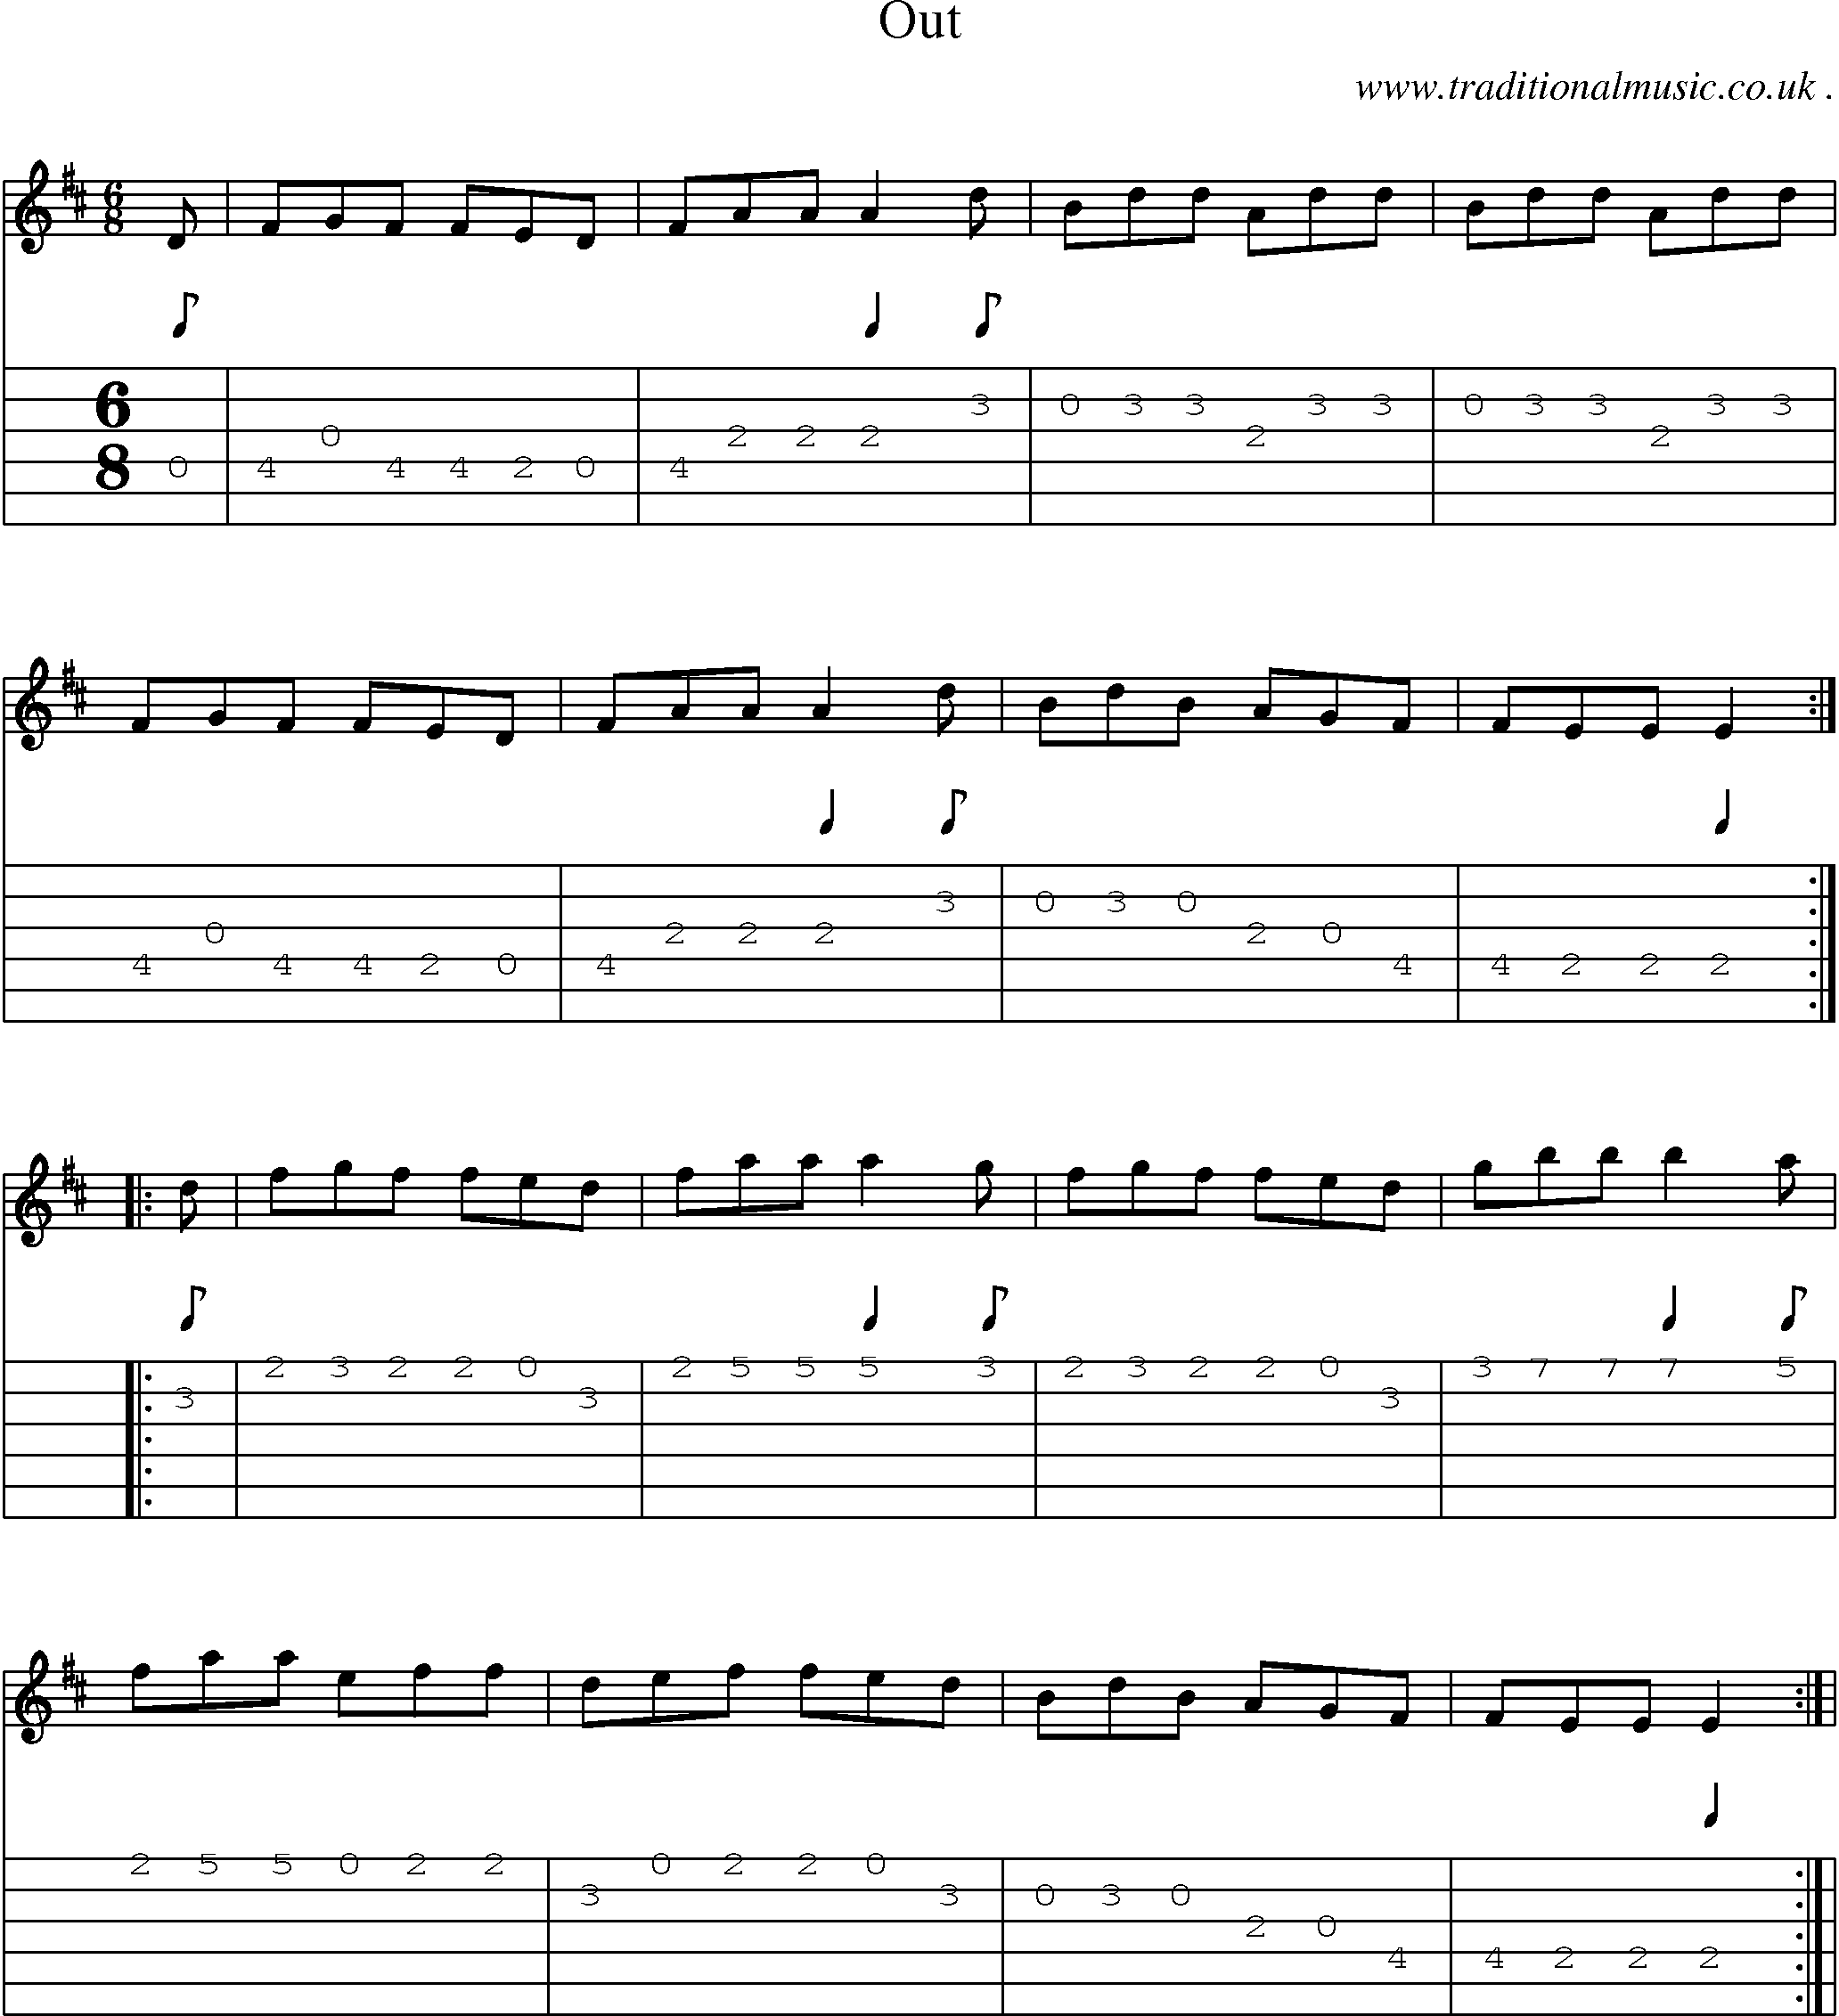 Sheet-Music and Guitar Tabs for Out